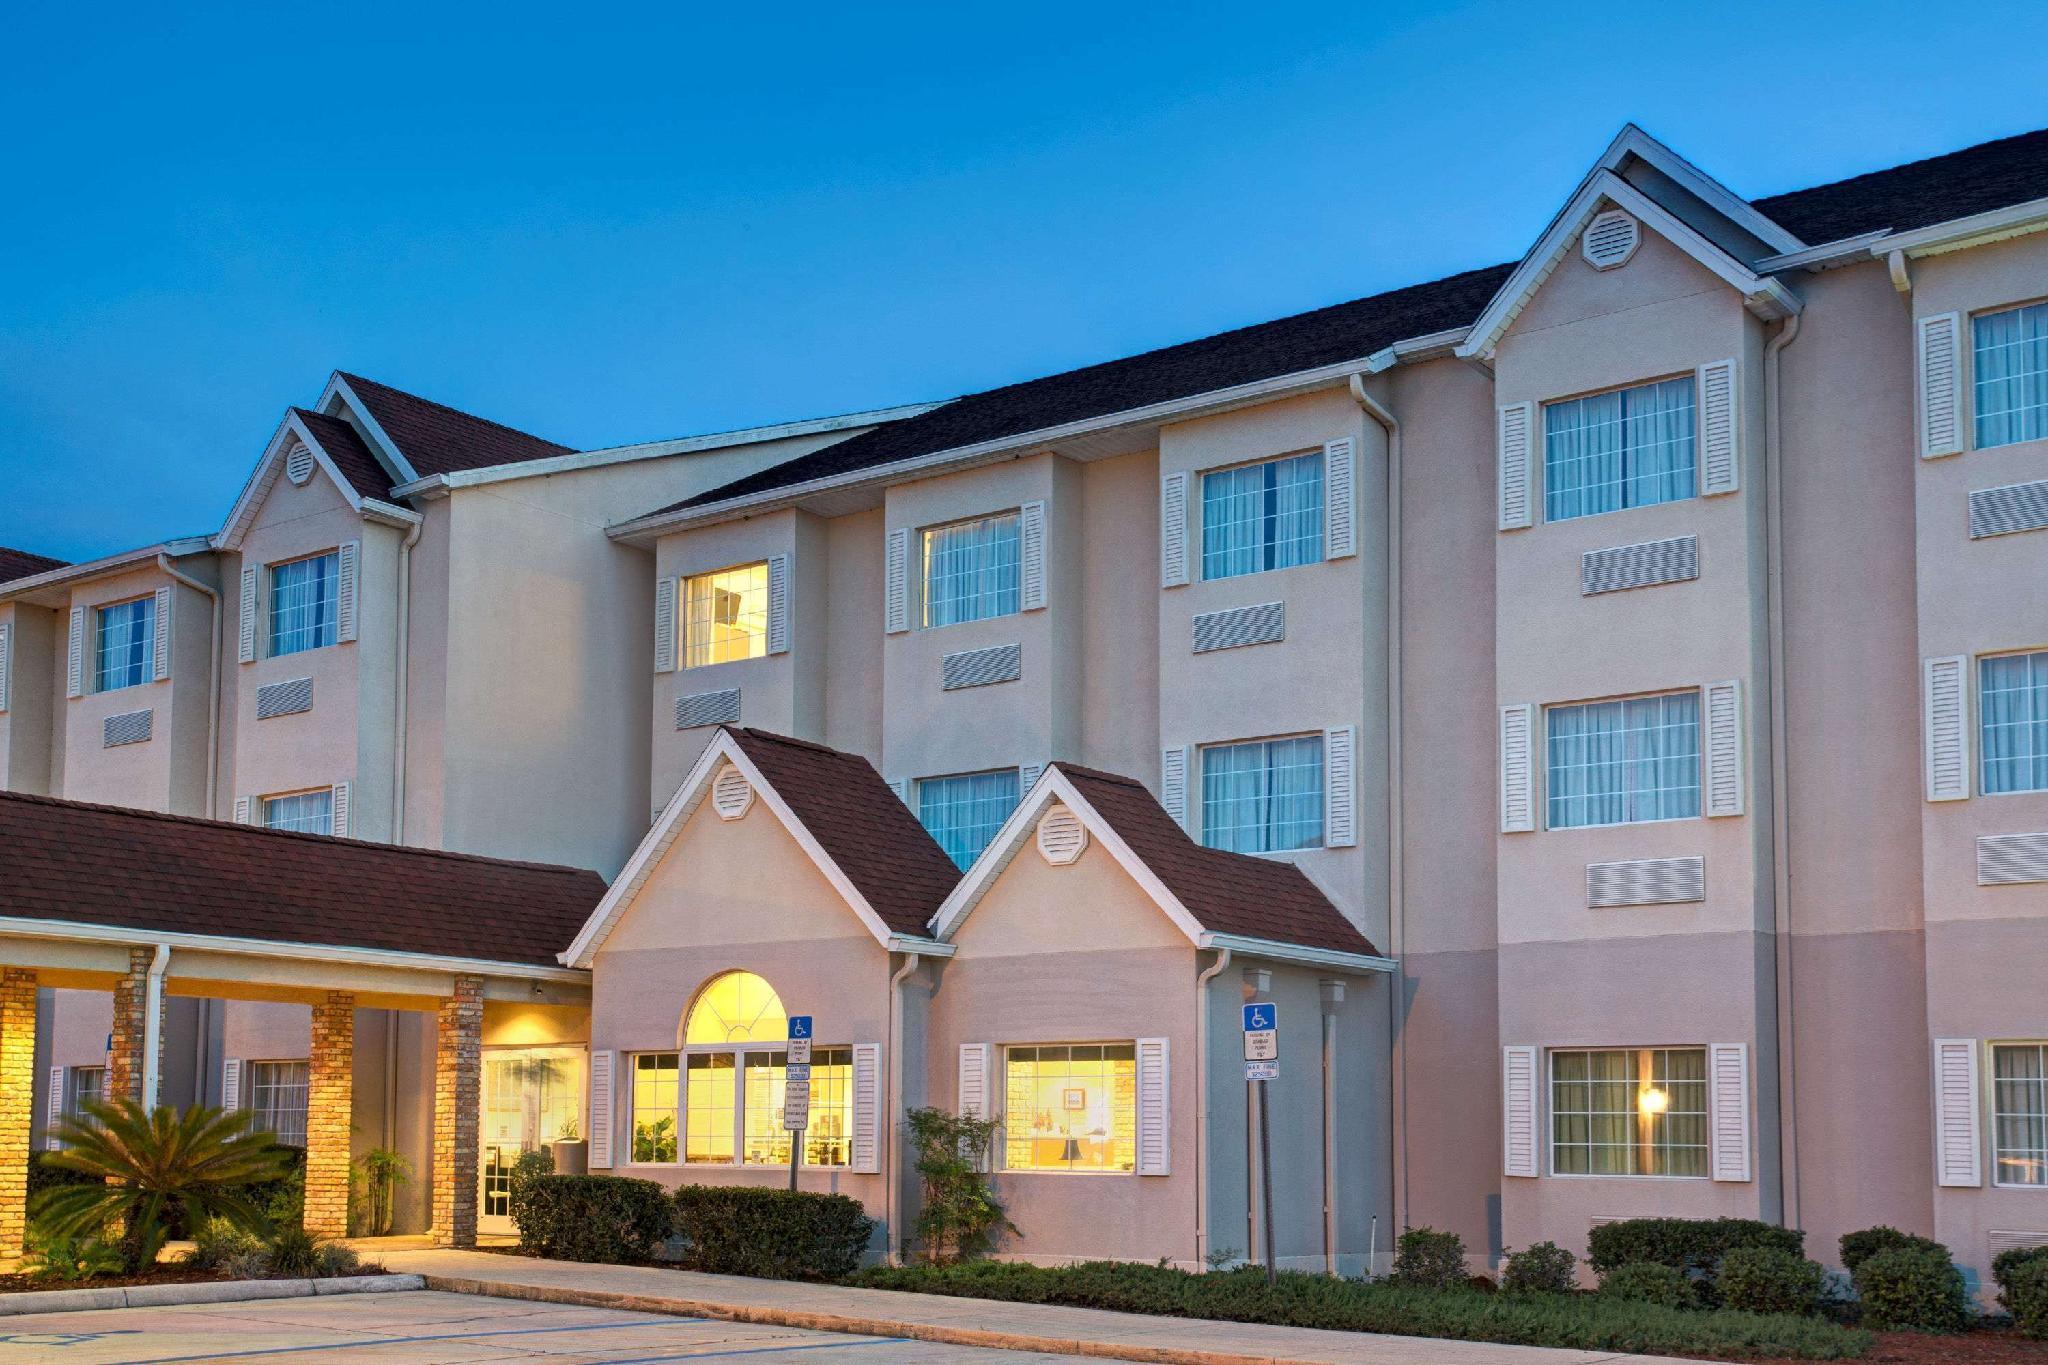 Microtel Inn And Suites By Wyndham - Lady Lake/ The Villages Εξωτερικό φωτογραφία